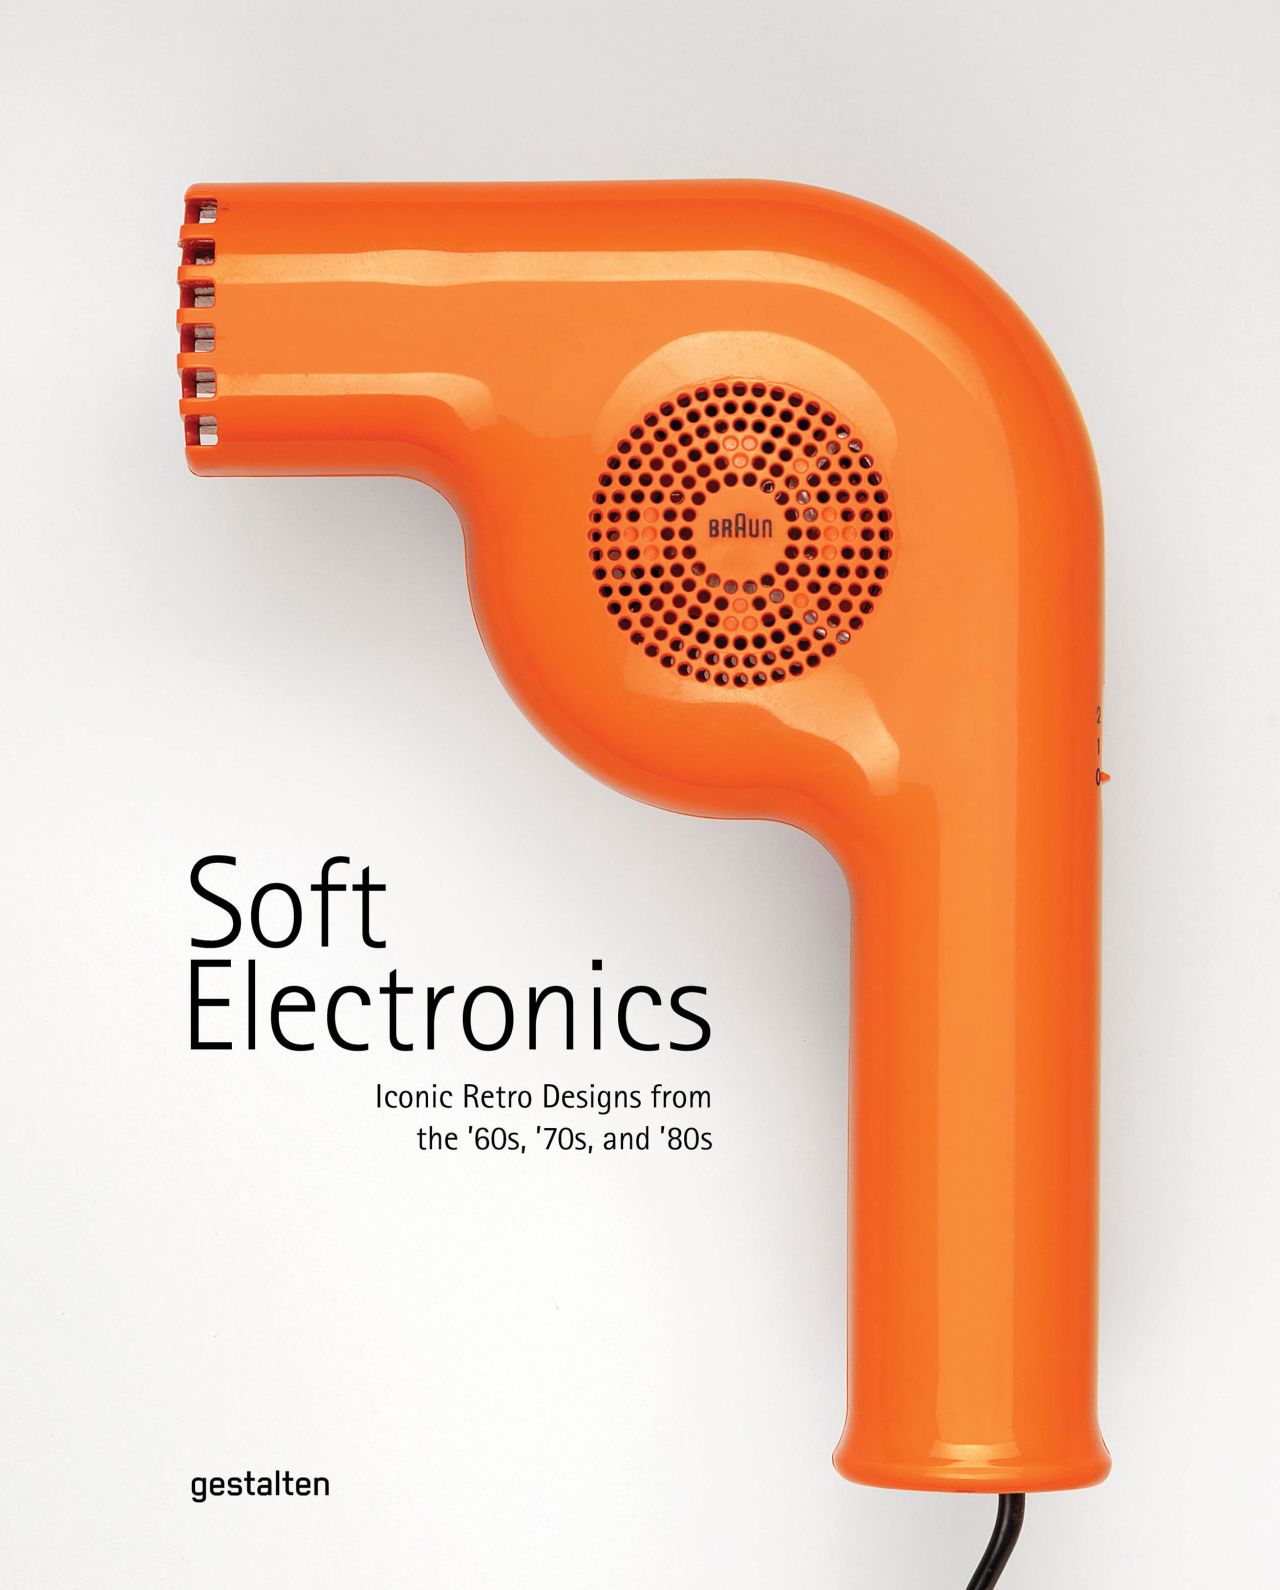 The cover of "Soft Electronics" by gestalten and Jaro Gielens features the Braun 550 hair dryer. 